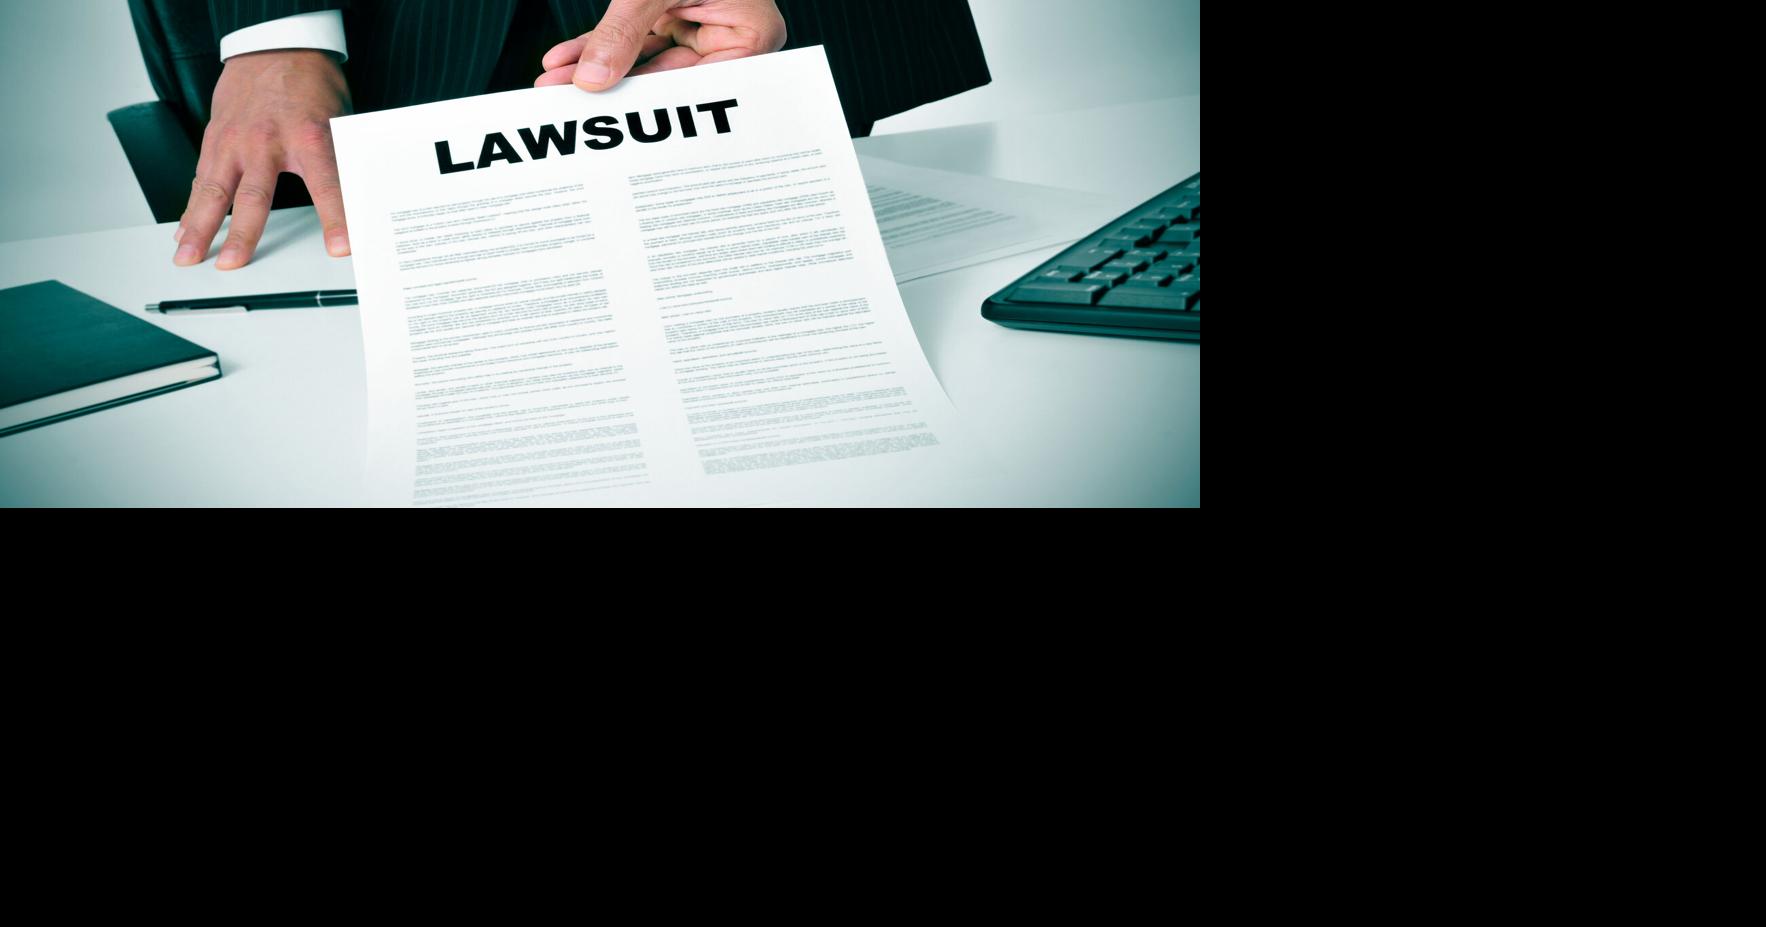 Ask General Counsel: What to do if you (or your business) has been sued | Business